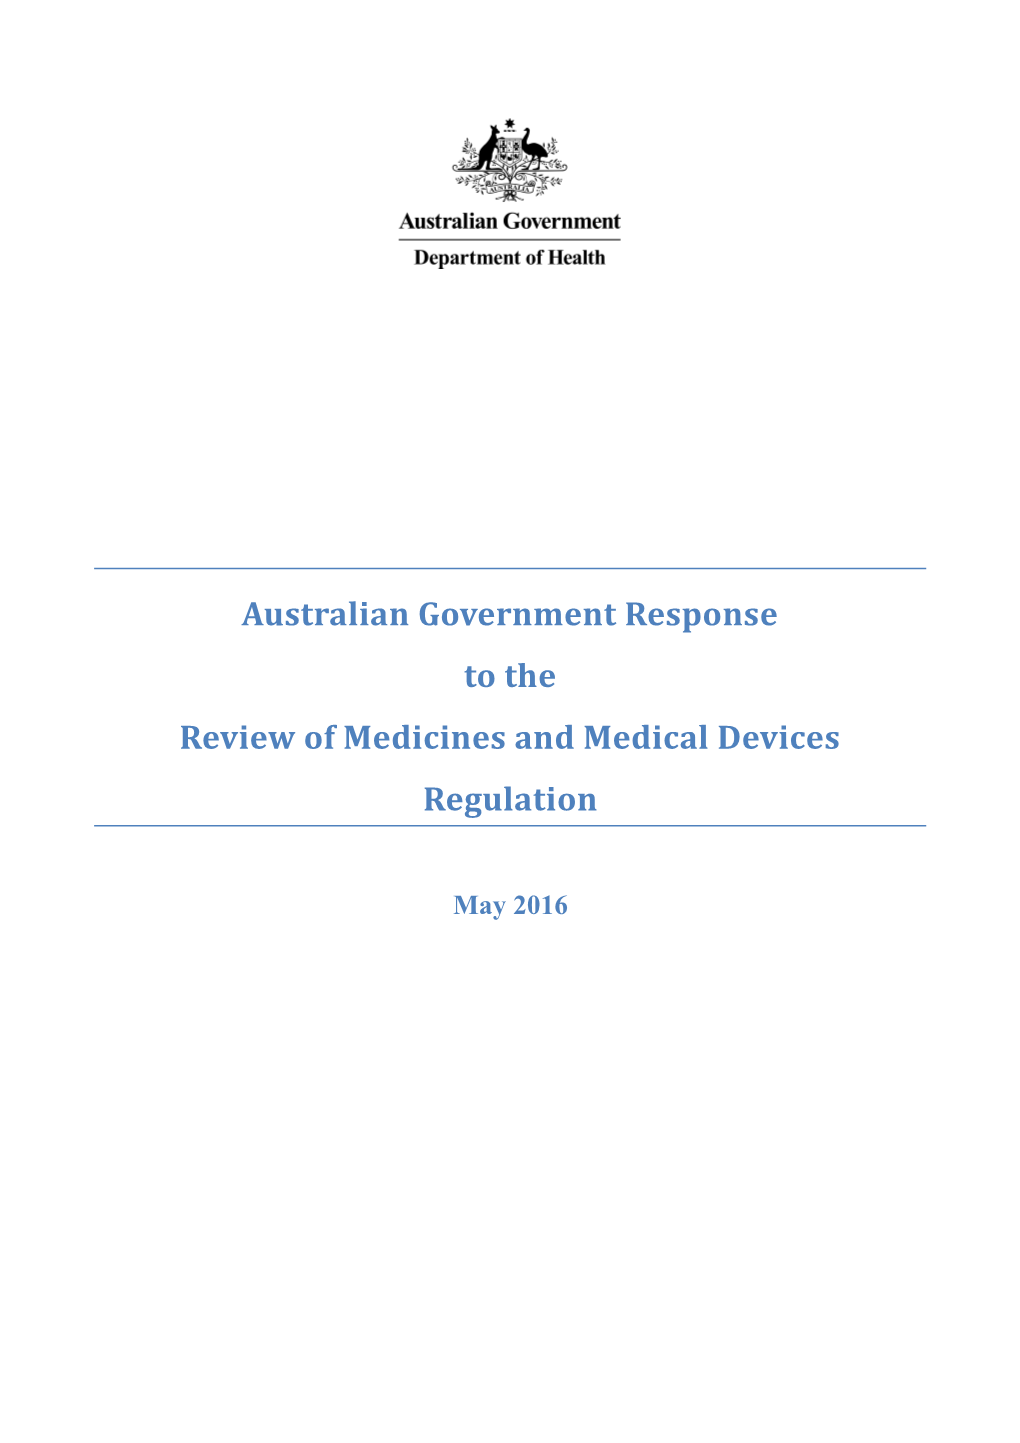 Australian Government Response to the Review of Medicines and Medical Devices Regulation